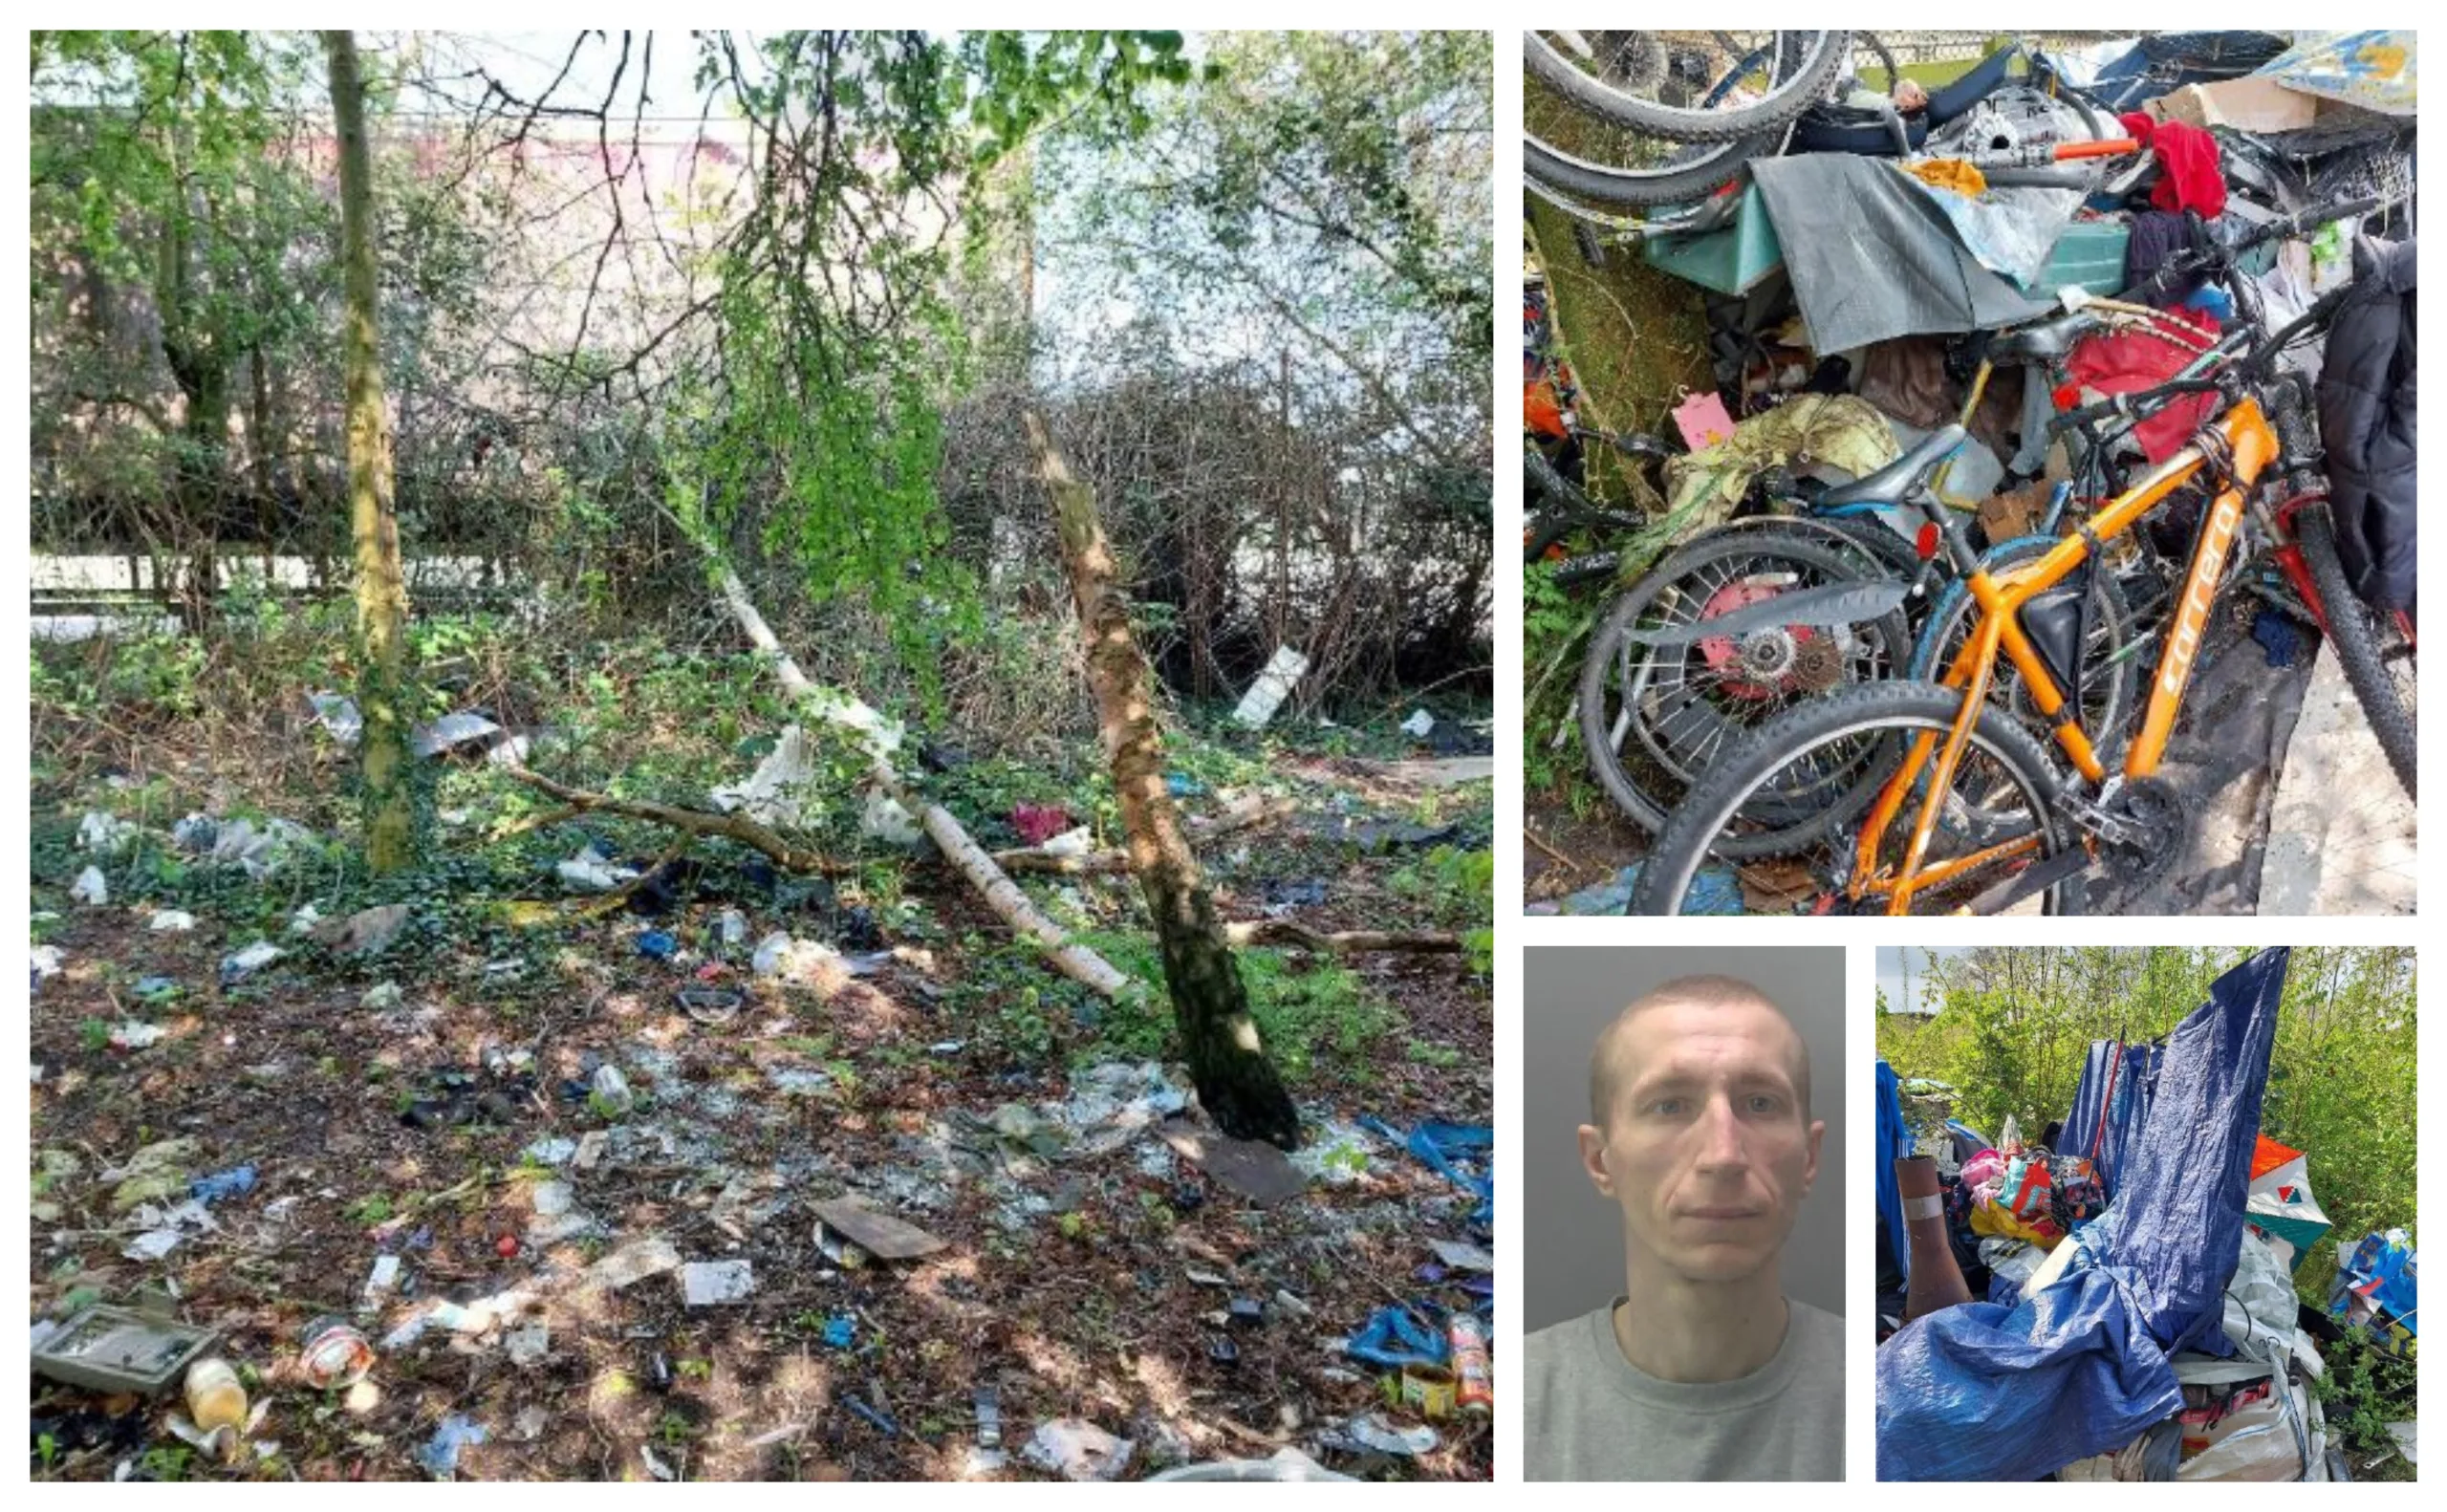 Kamil Mielncizk, 31, is in prison for breaching a CBO, and entering Wisbech recycling centre through a fence. The homeless man lives on this campsite next to the centre and has refused all offers of help.